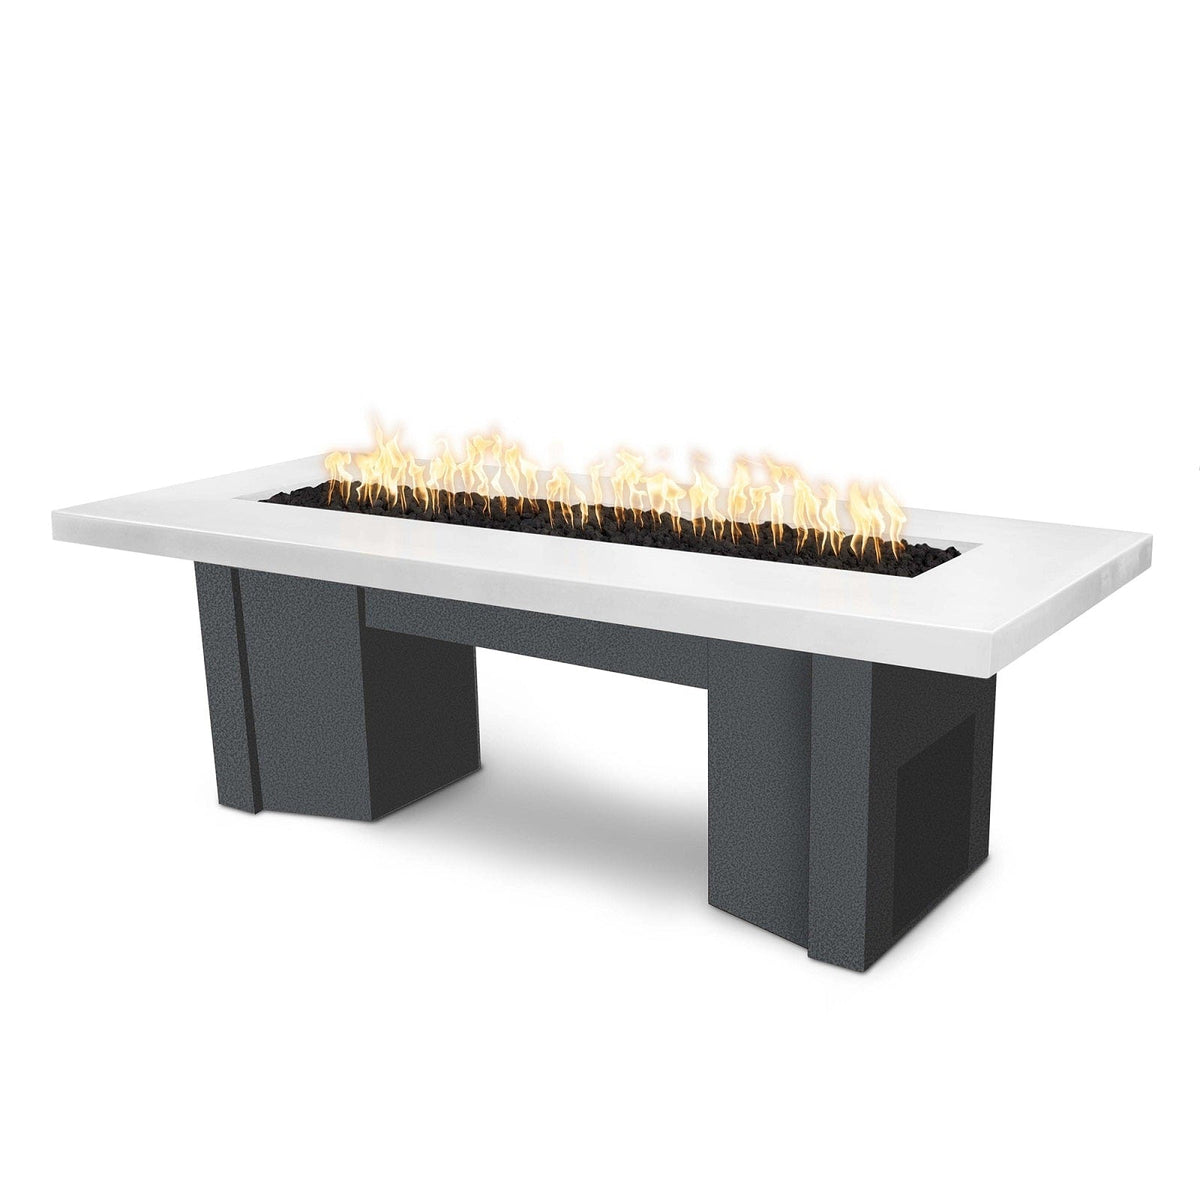 The Outdoor Plus Fire Features Limestone (-LIM) / Silver Vein Powder Coated Steel (-SLV) The Outdoor Plus 60&quot; Alameda Fire Table Smooth Concrete in Liquid Propane - Match Lit with Flame Sense System / OPT-ALMGFRC60FSML-LP